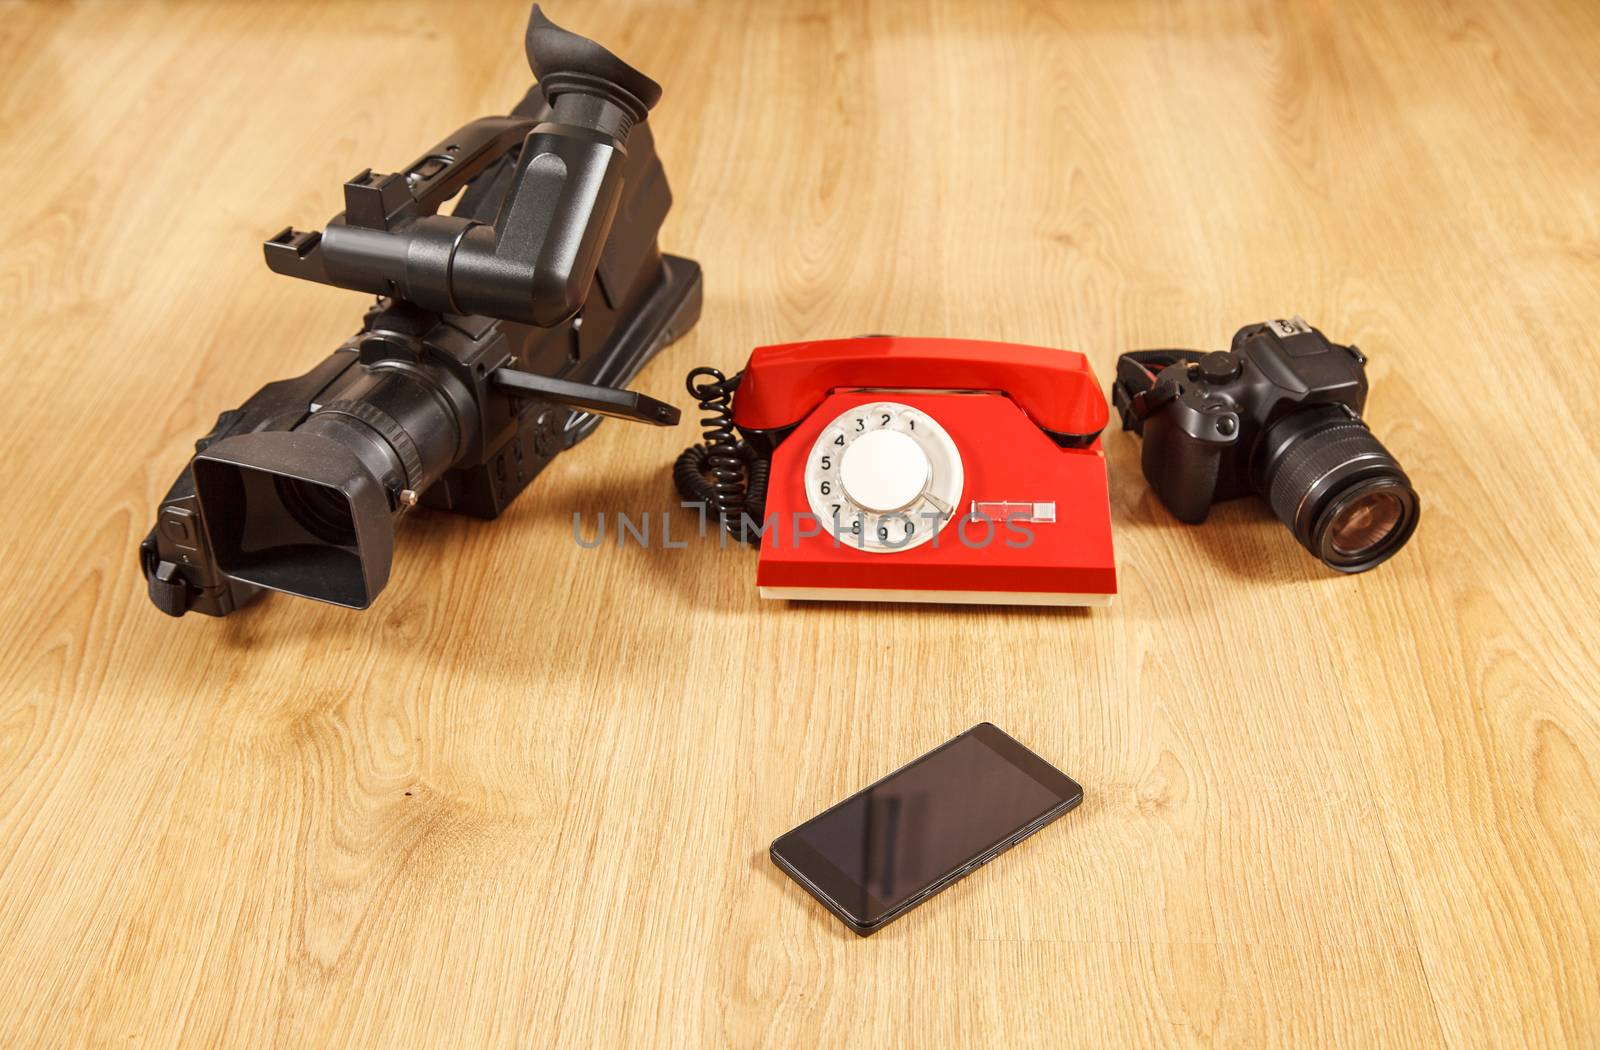 smartphone as a universal device - phone, camera, camcorderю conceptual photo